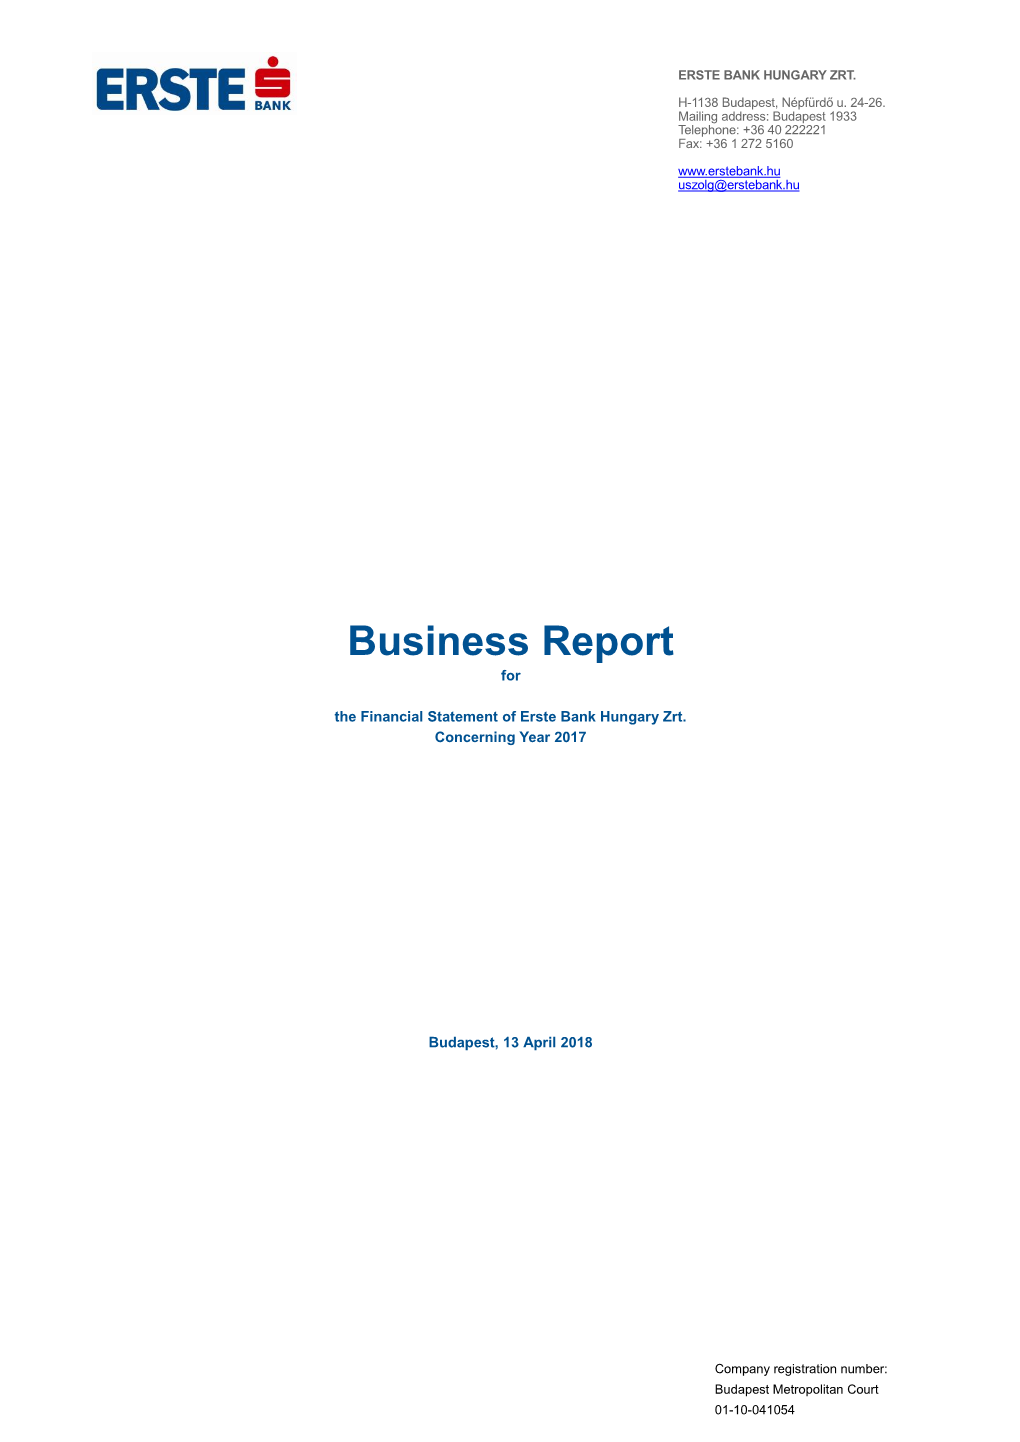 Business Report for the Financial Statement of Erste Bank Hungary Zrt